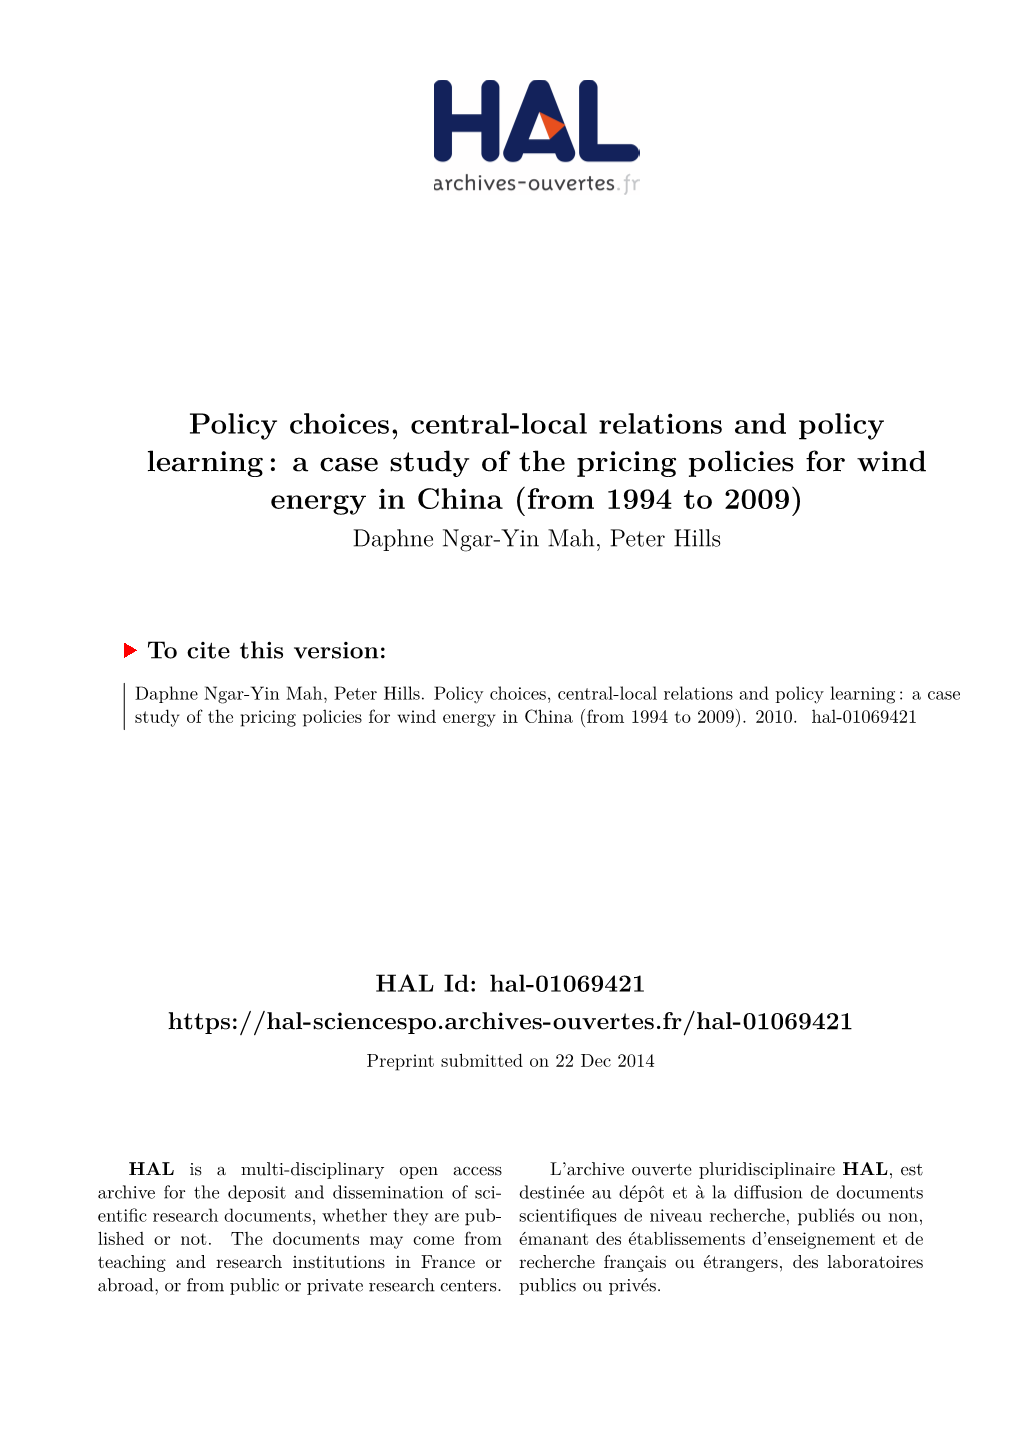 A Case Study of the Pricing Policies for Wind Energy in China (From 1994 to 2009) Daphne Ngar-Yin Mah, Peter Hills